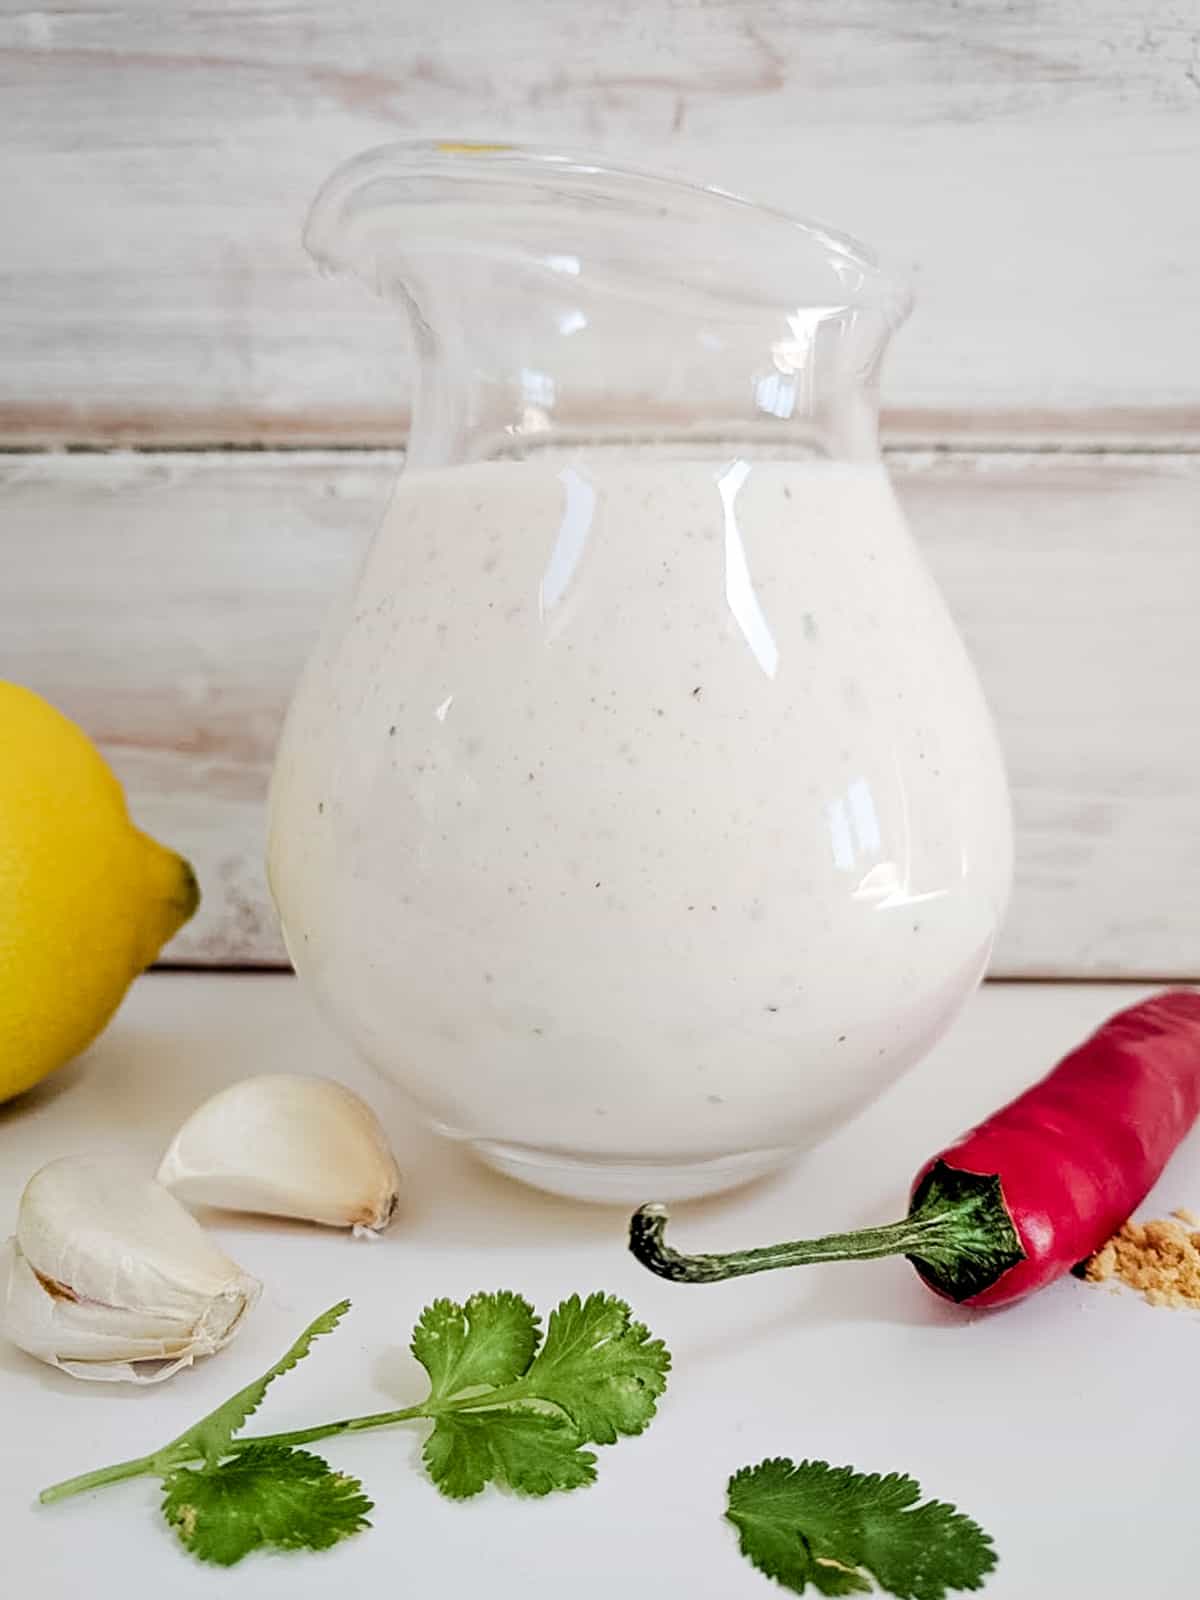 A glass jug of creamy dressing with lemon, garlic, cilantro and chili on the side